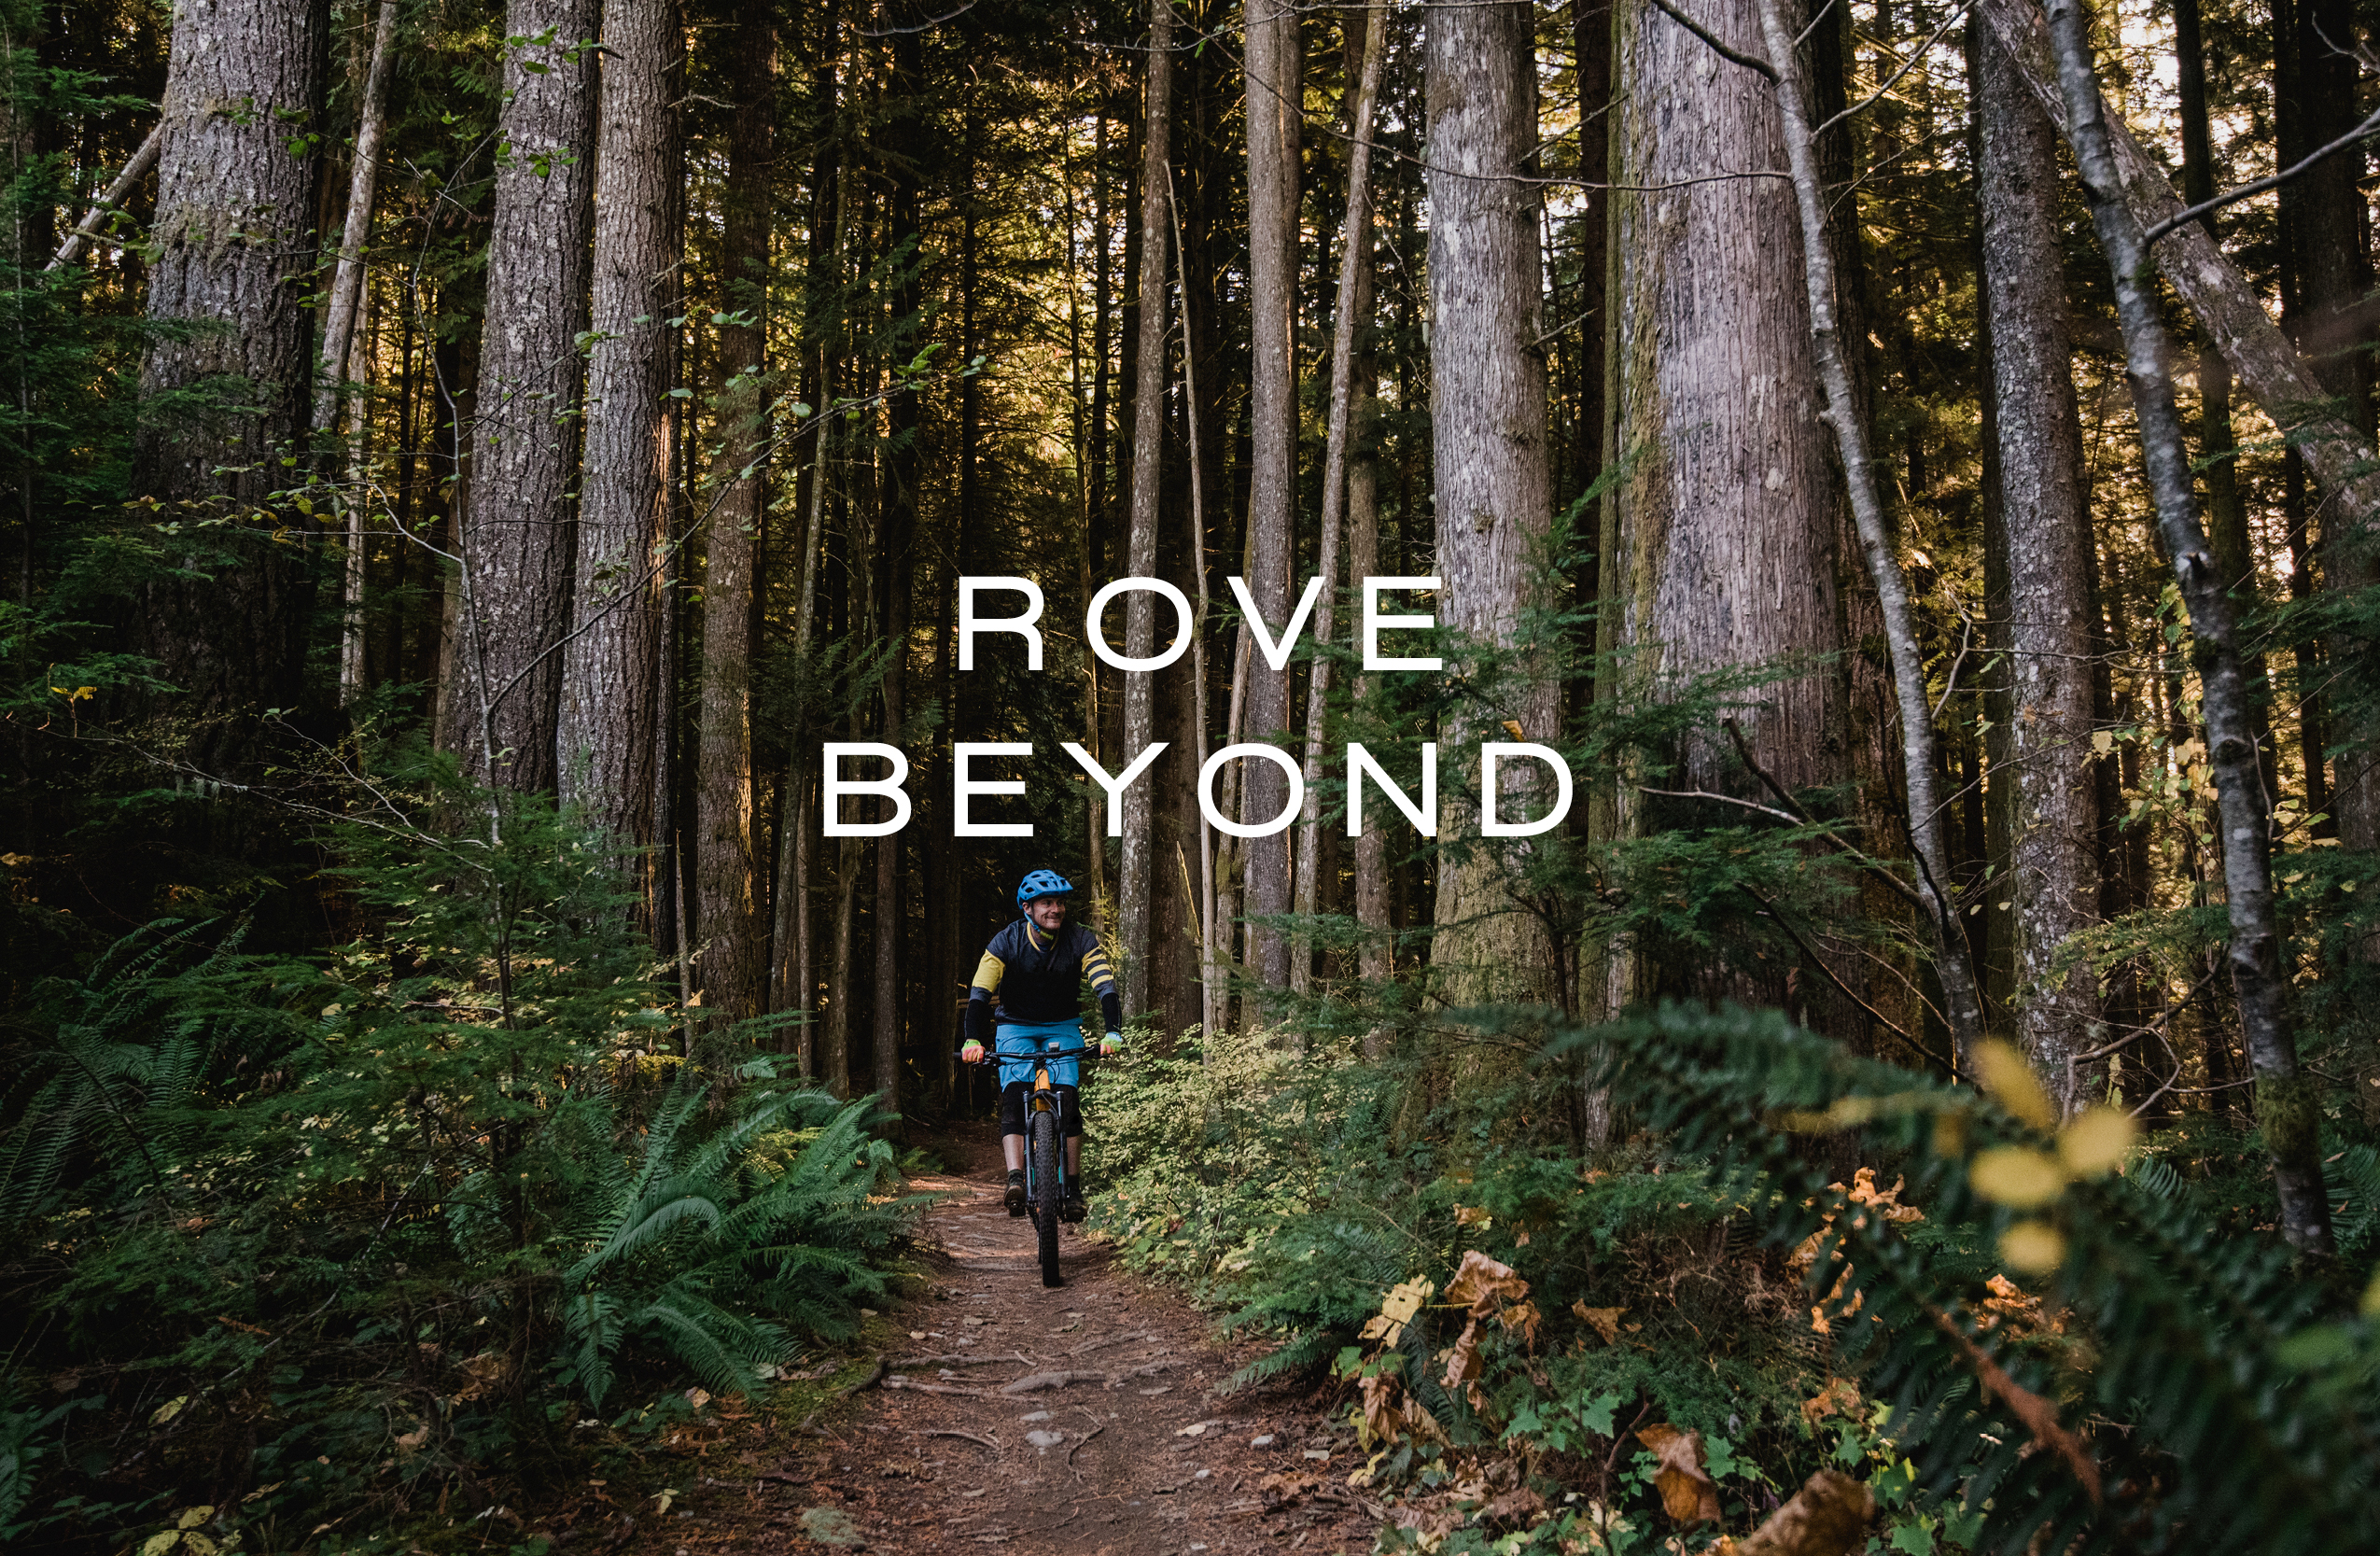 Rove Beyond Image; Biker in Forest